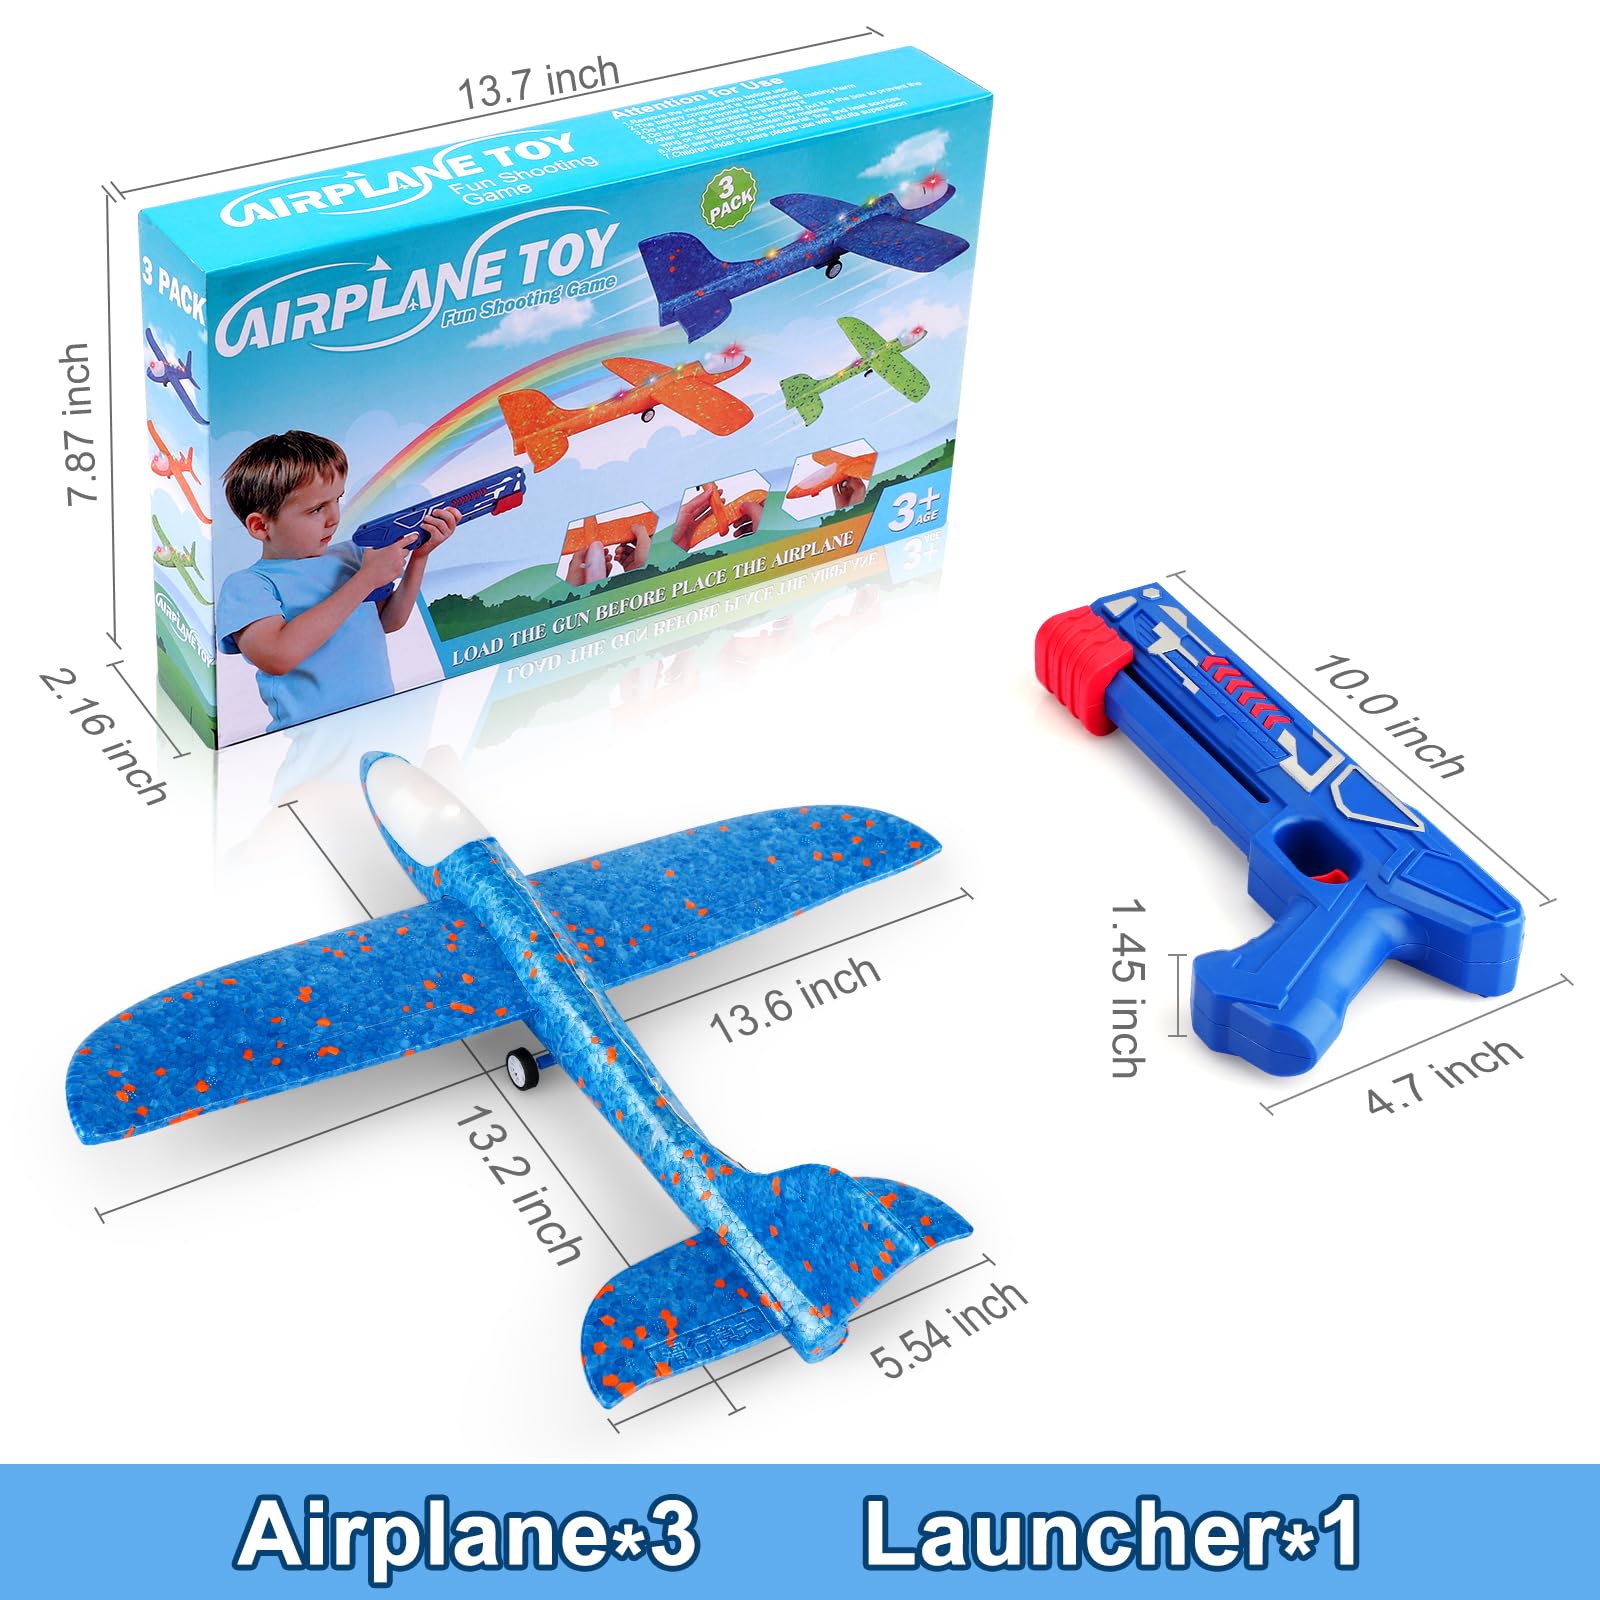 Fuwidvia 3 Pack Airplane Launcher Toys, 13.2'' LED Foam Glider Catapult Plane Toy for Boys, 2 Flight Modes Outdoor Flying Toys Birthday Gifts for Boys Girls 4 5 6 7 8 9 10 11 12 Year Old